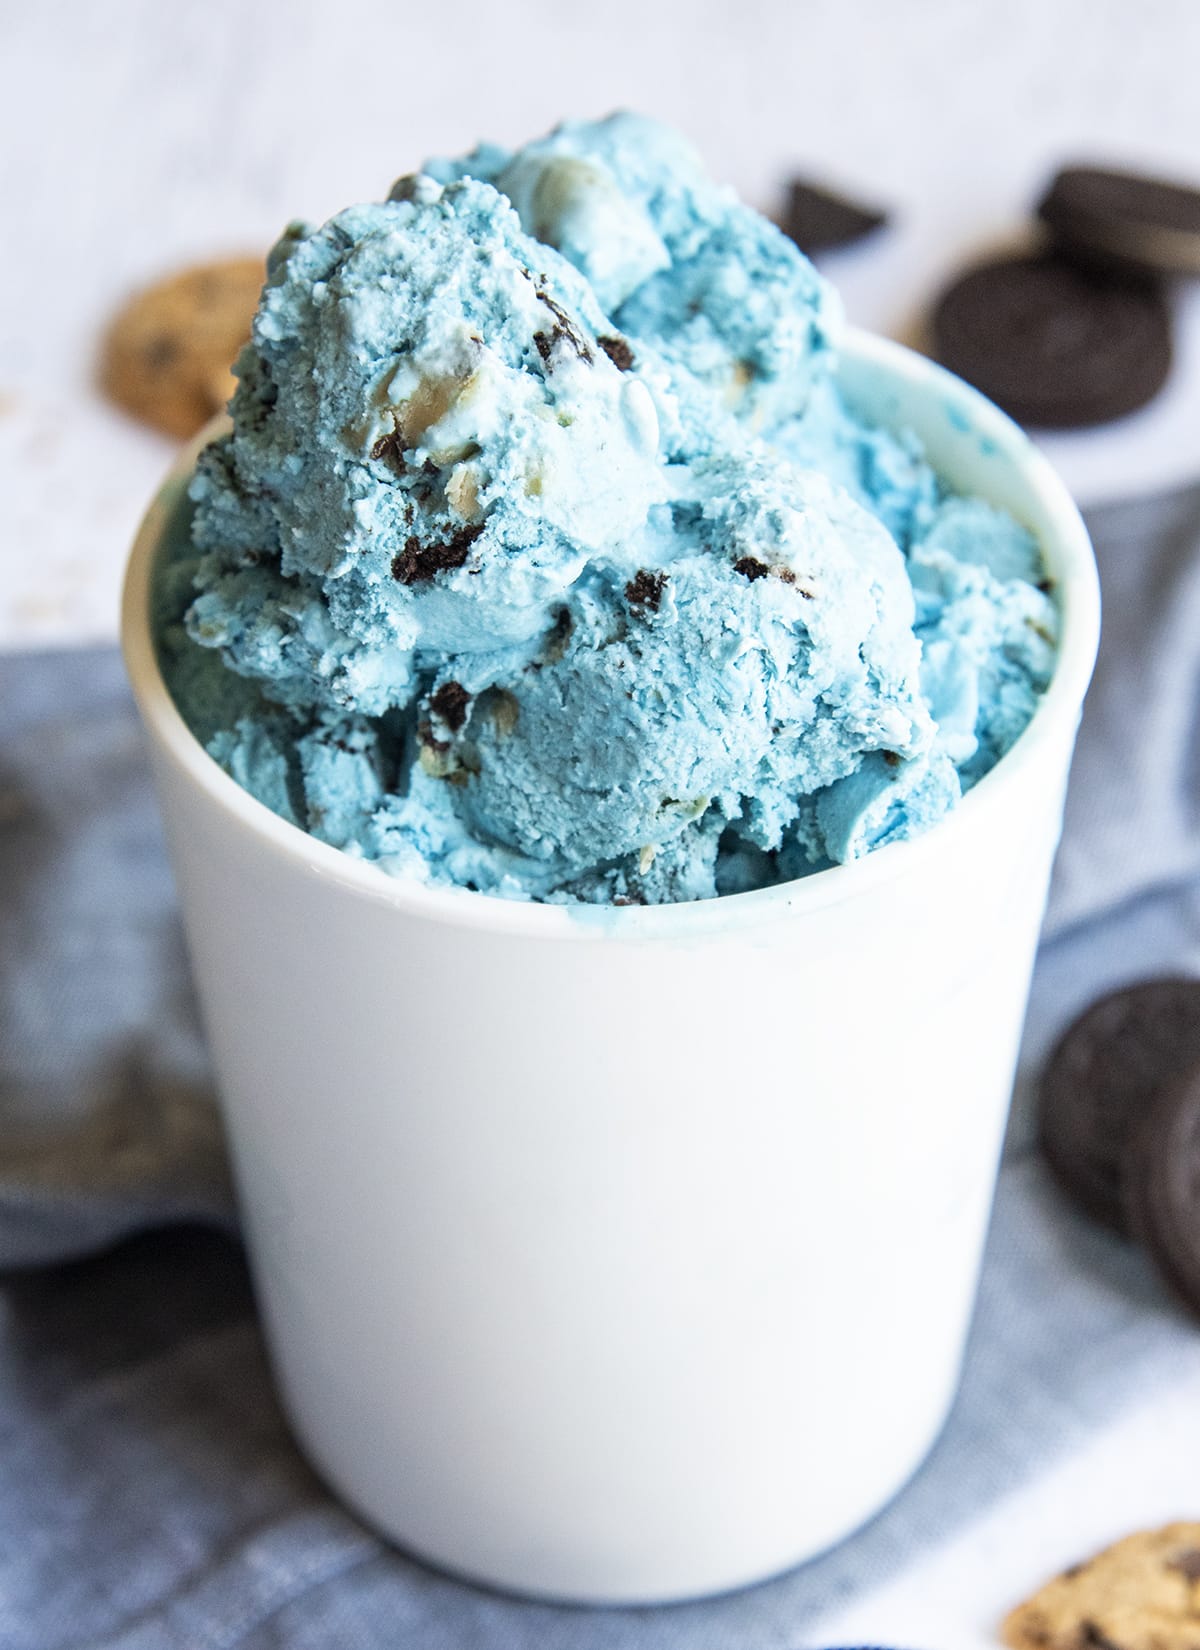 A white container of blue ice cream full of Oreo pieces and Cookie dough pieces.